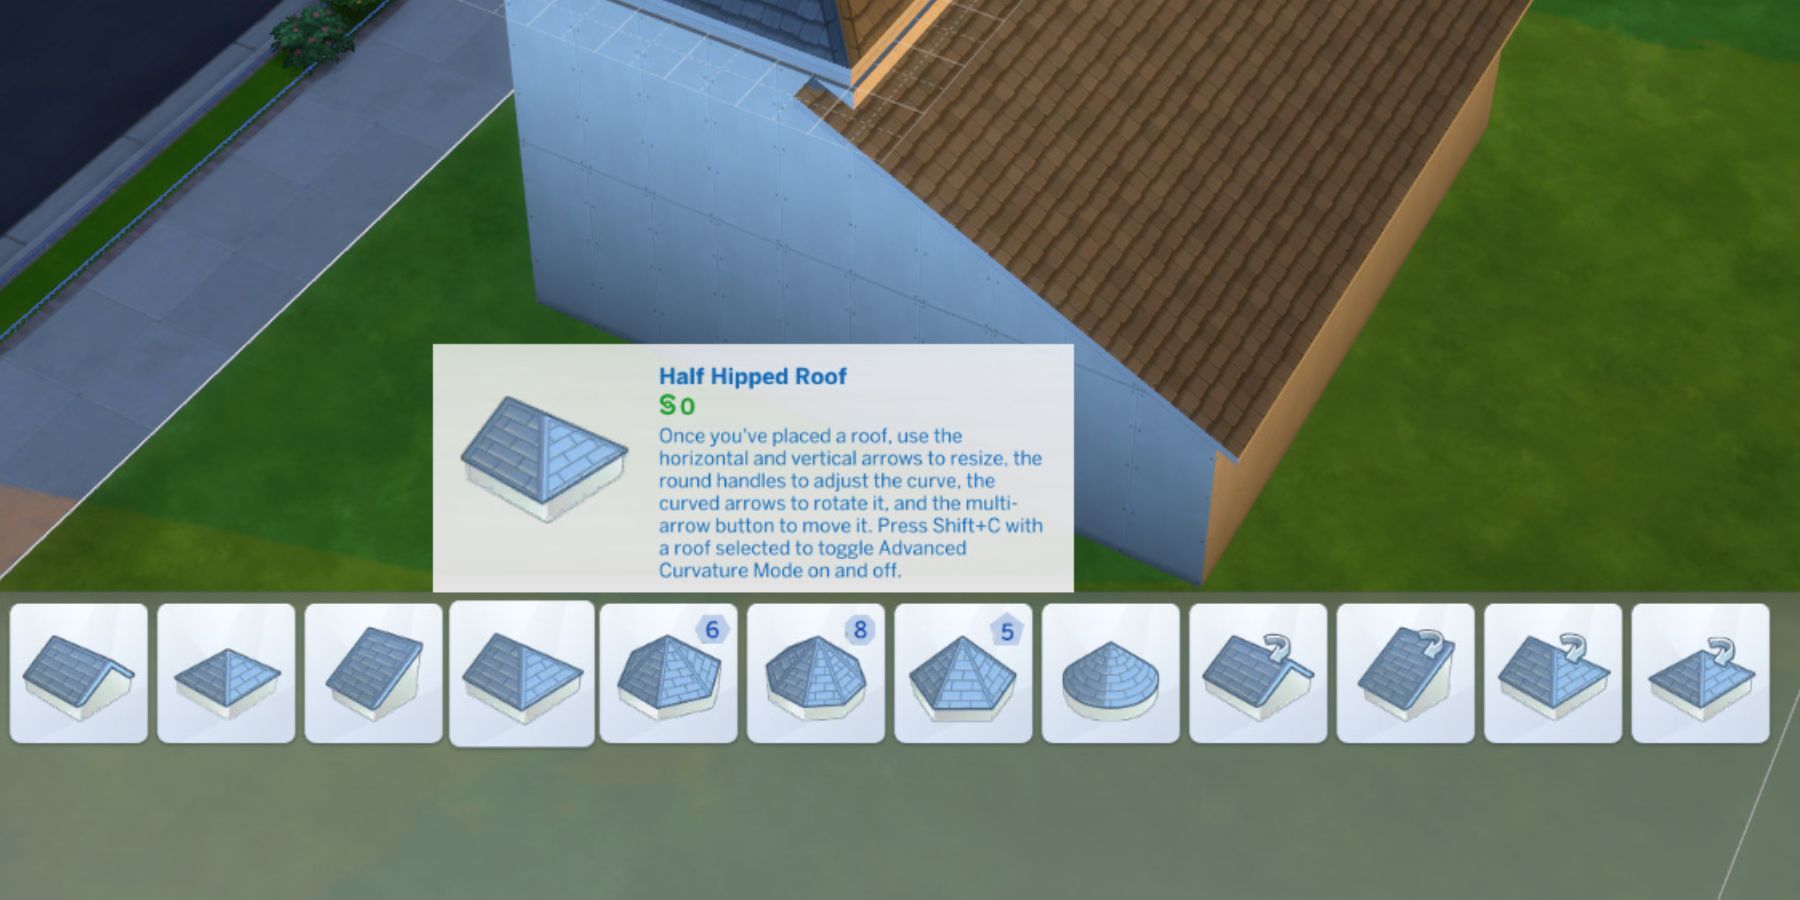 The Sims 4 Roofs